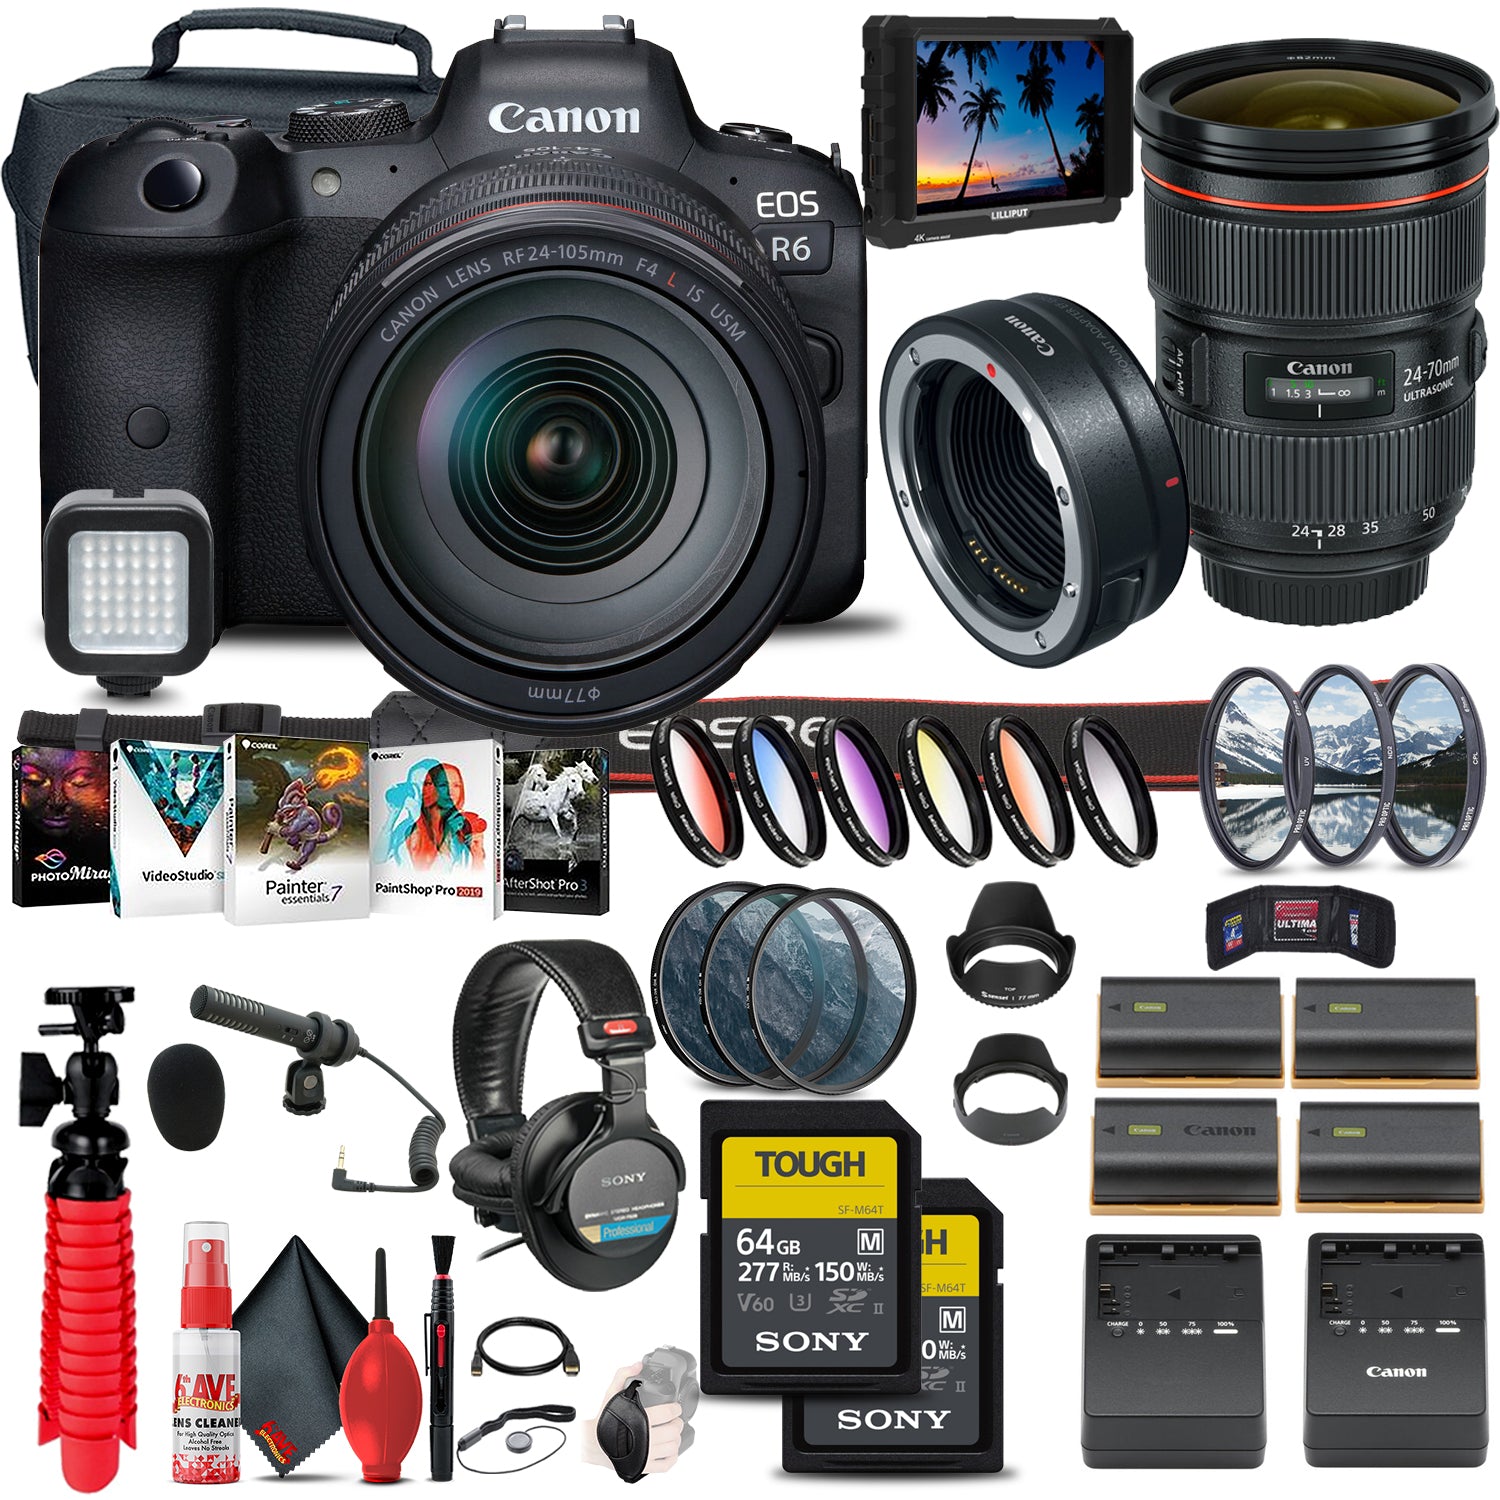 Canon EOS R6 with 24-105mm f/4L Lens Ultimate Travel Vlogger Bundle